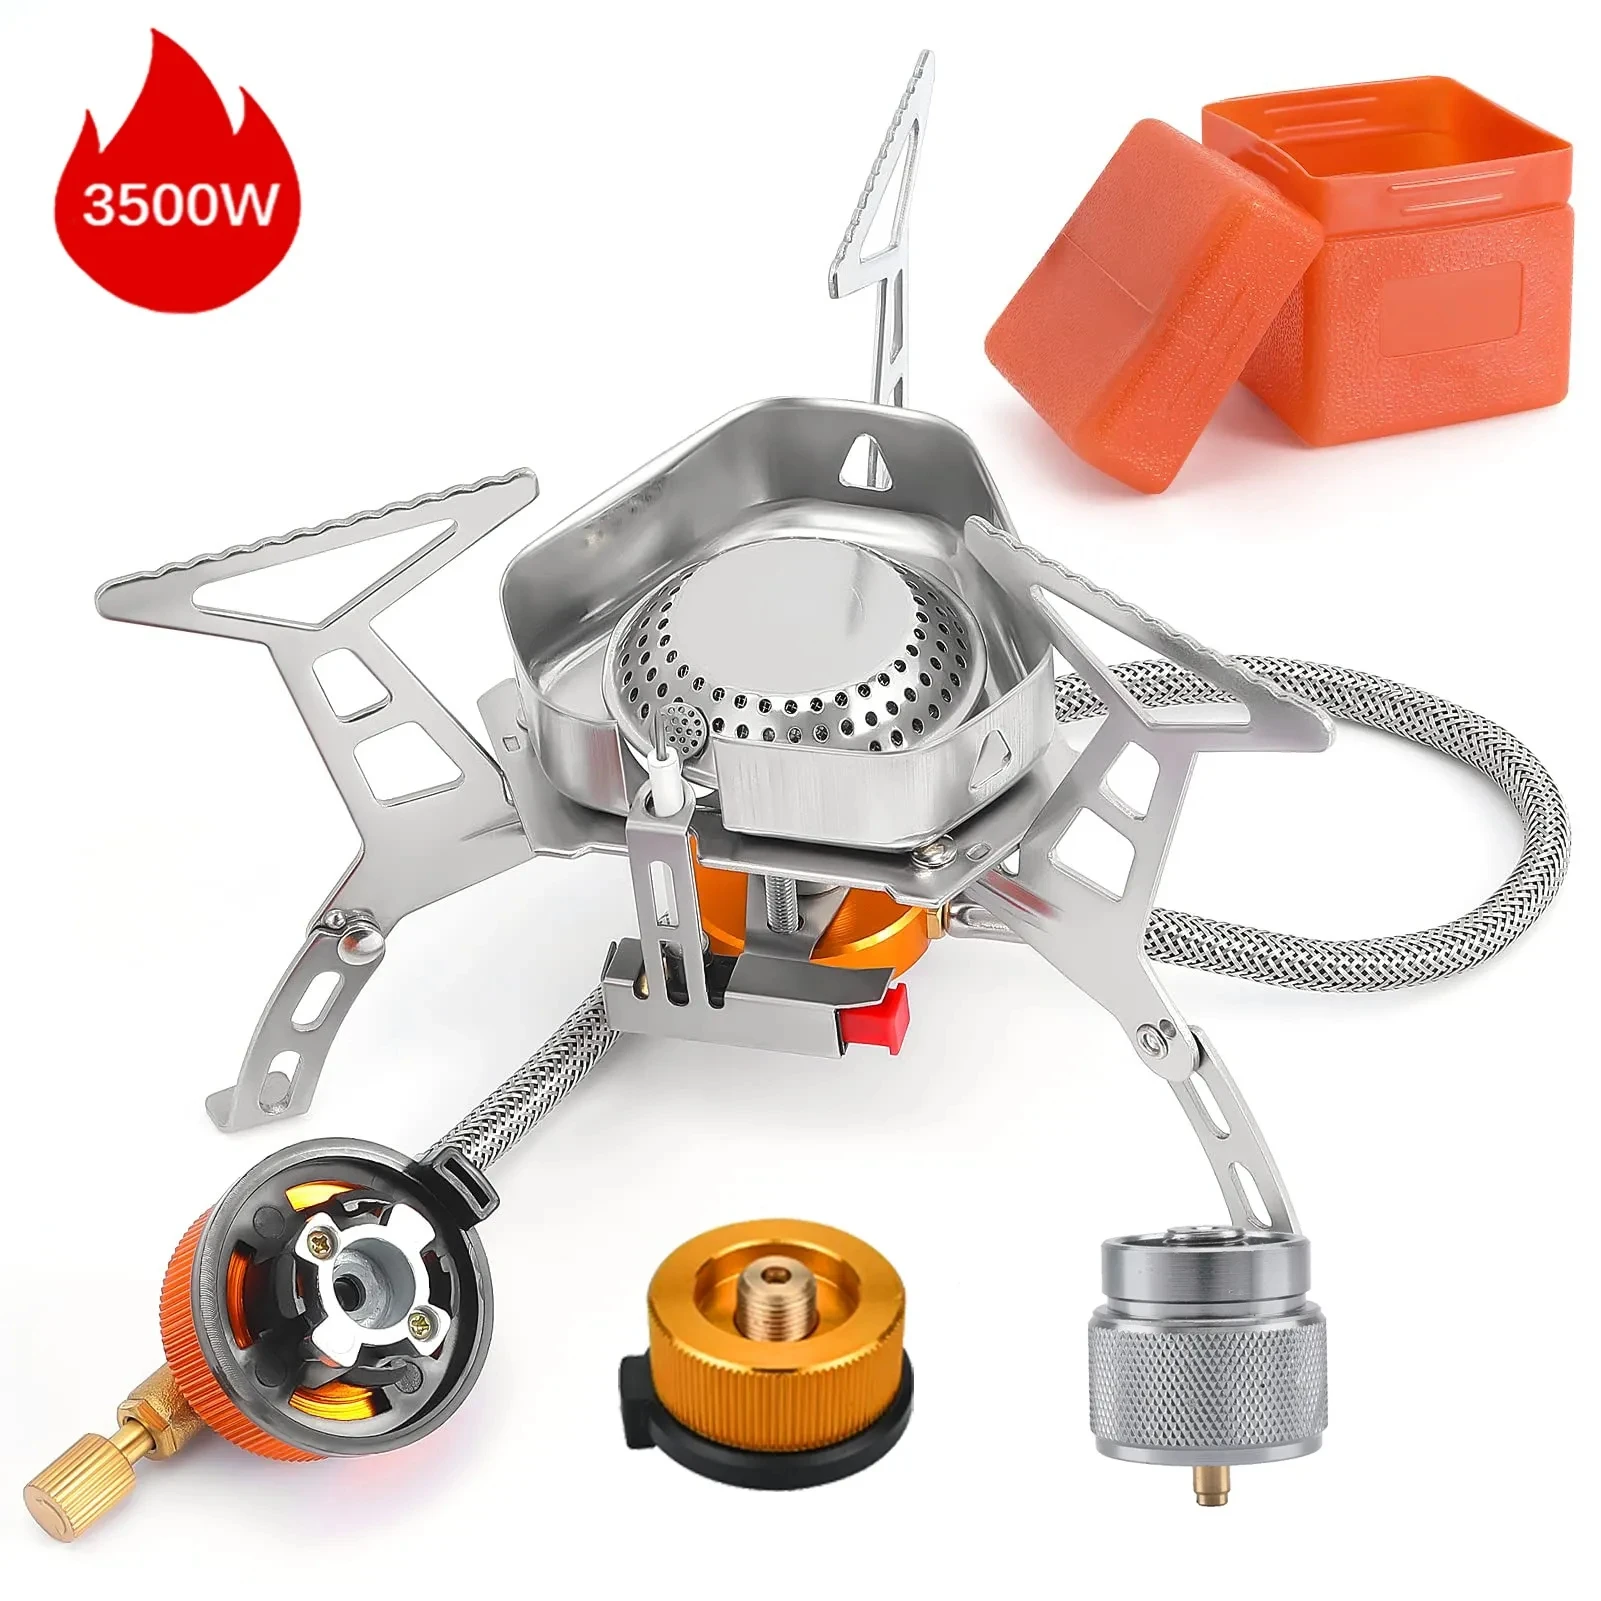 

Camping WindProof Gas Stove Outdoor Tourist Burner Strong Fire Heater Tourism Cooker Portable Furnace Supplies Equipment Picnic